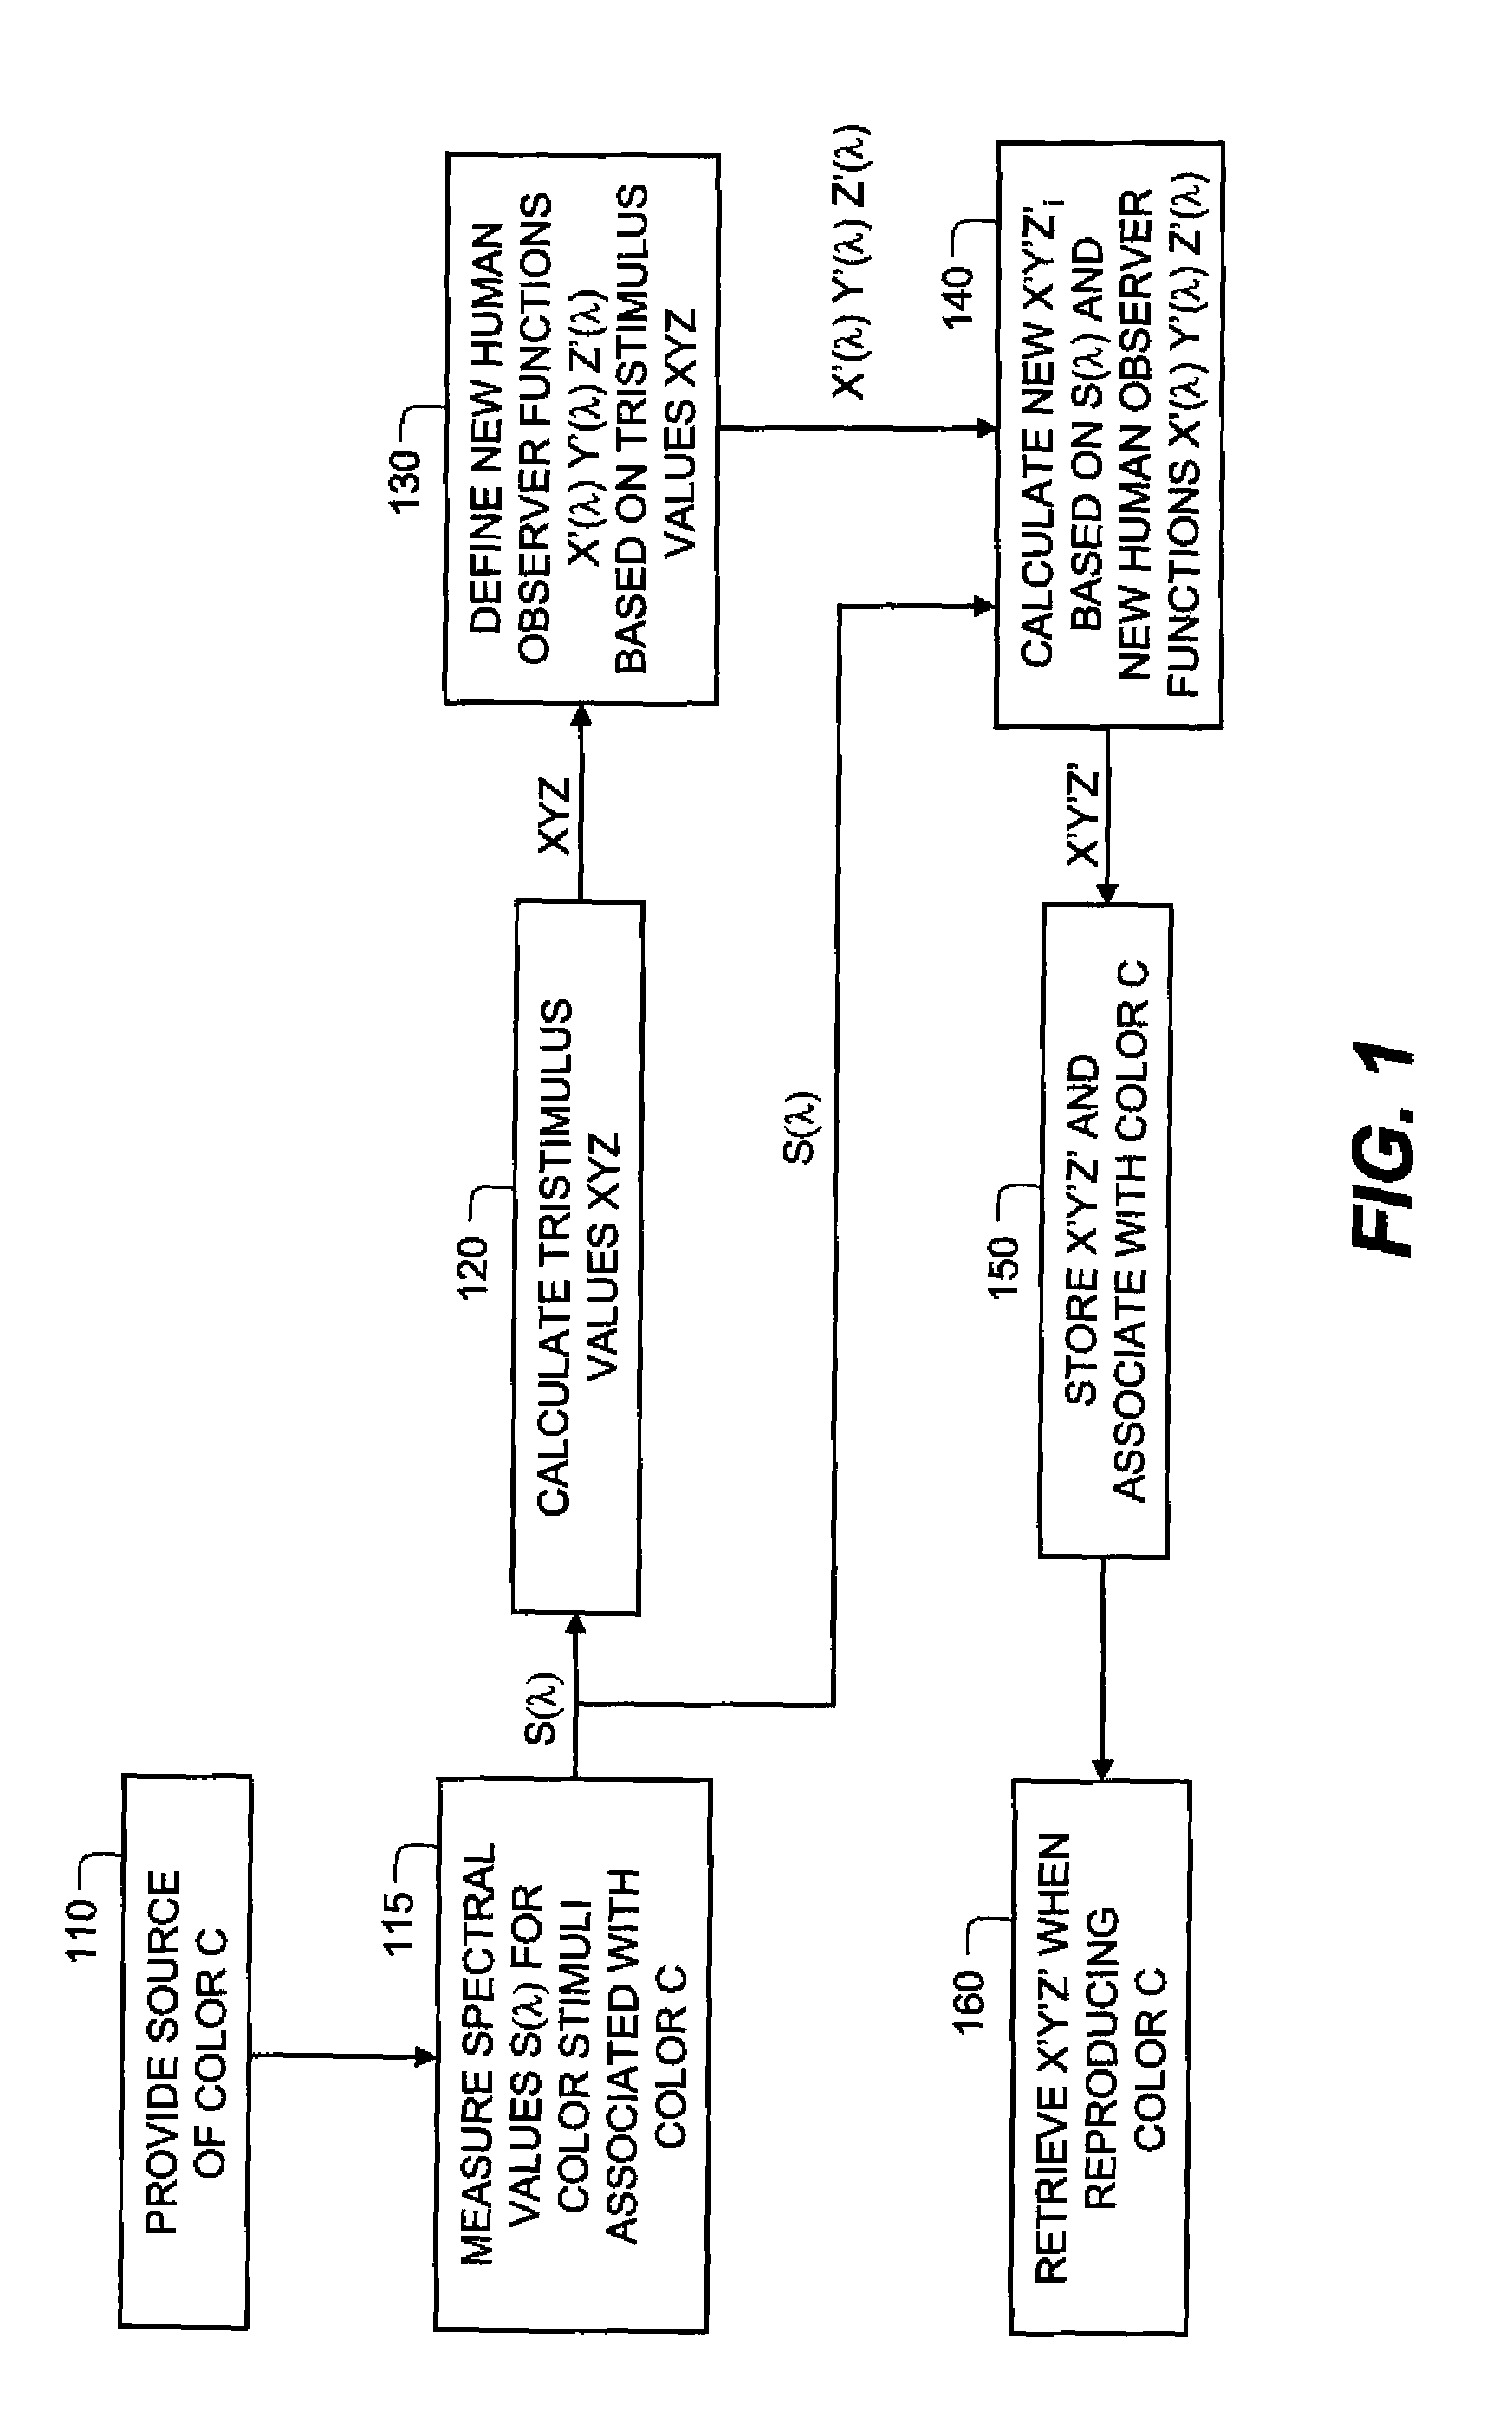 Method and apparatus for measuring colors